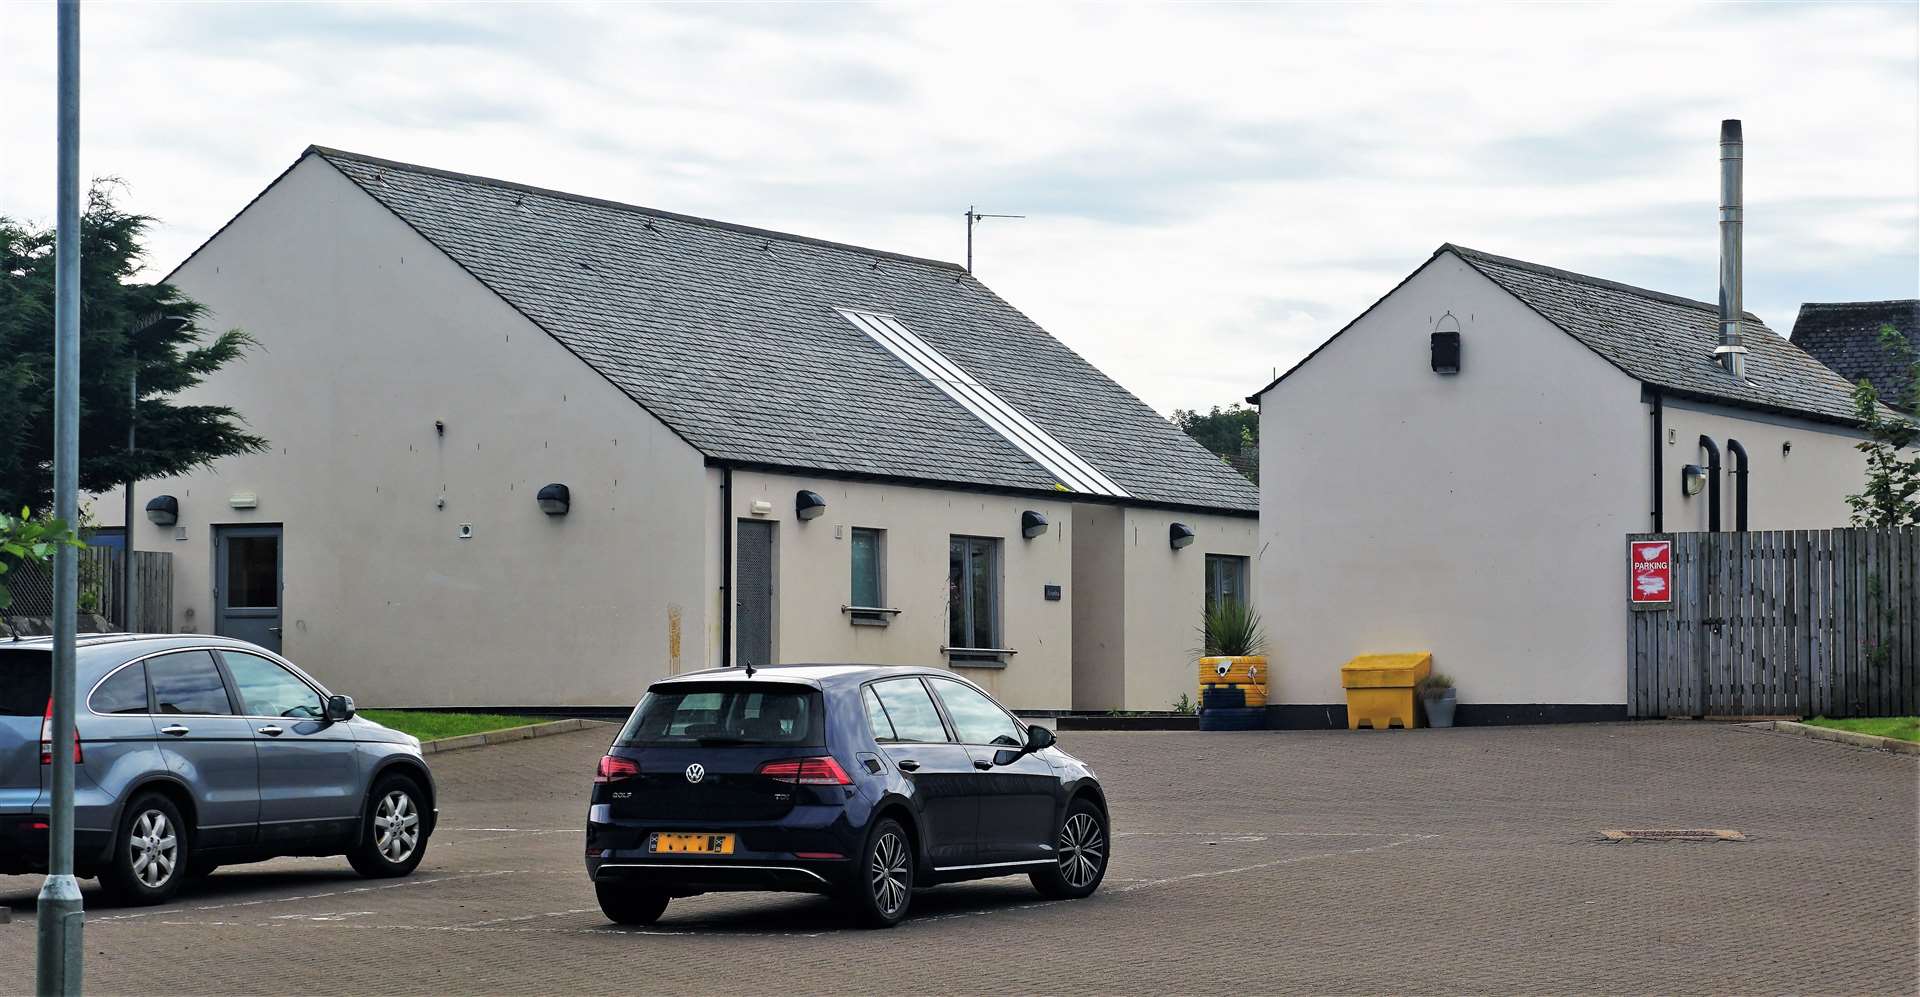 Avonlea care home in Wick is now closed.